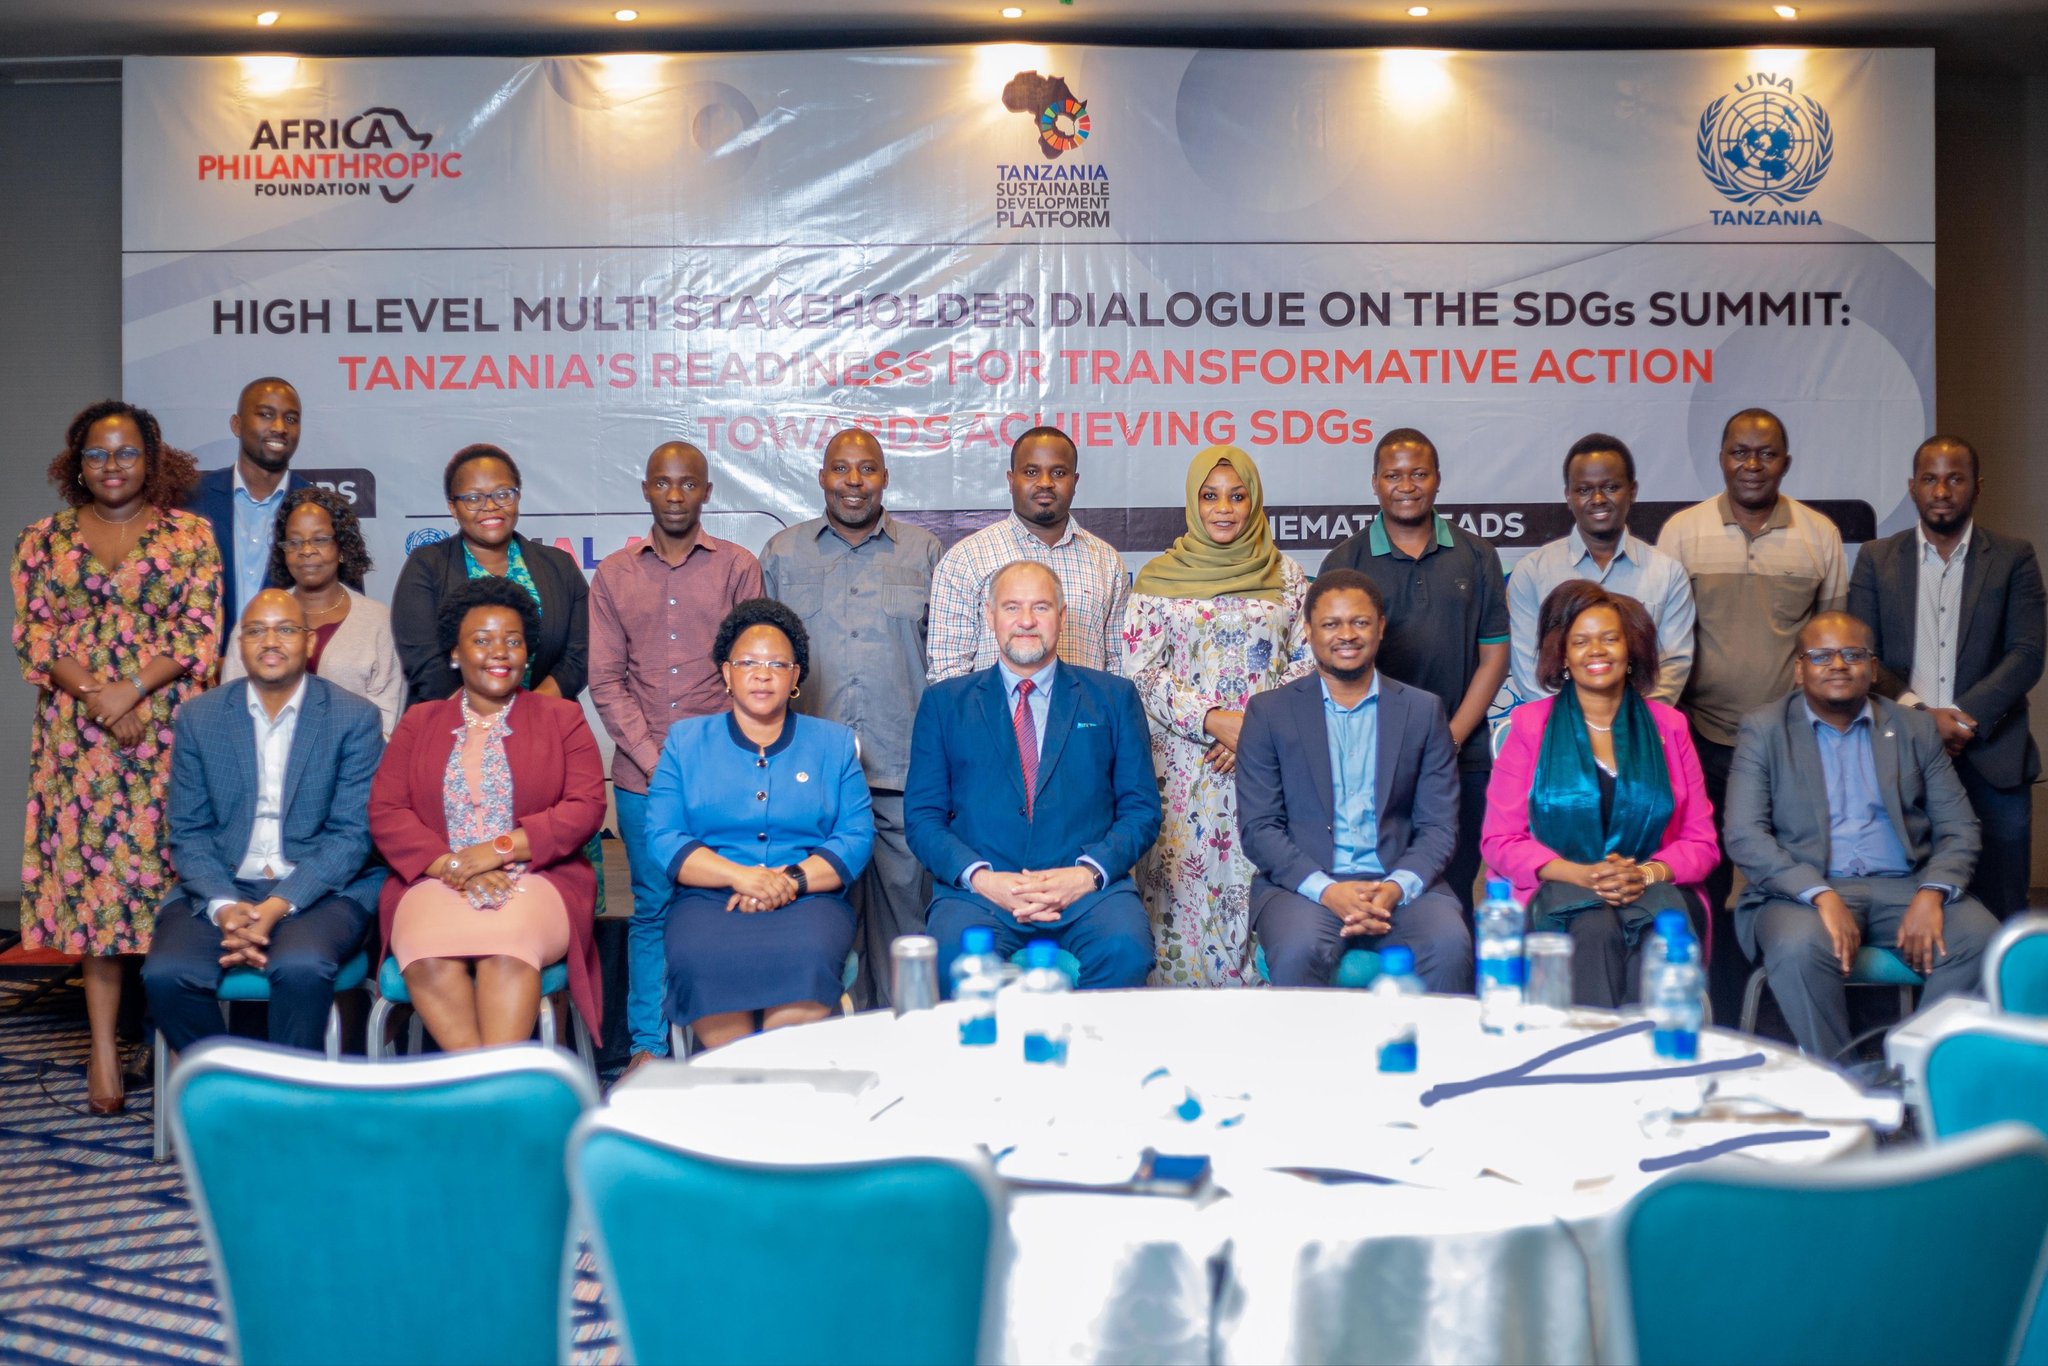 THE HIGHLEVEL MULTISTAKEHOLDR DIALOGUE TOWARDS THE SDGs SUMMIT:TANZANIA’S READINESS FOR TRANSFORMATIVE ACTION TOWARDS ACHIEVING SDGs